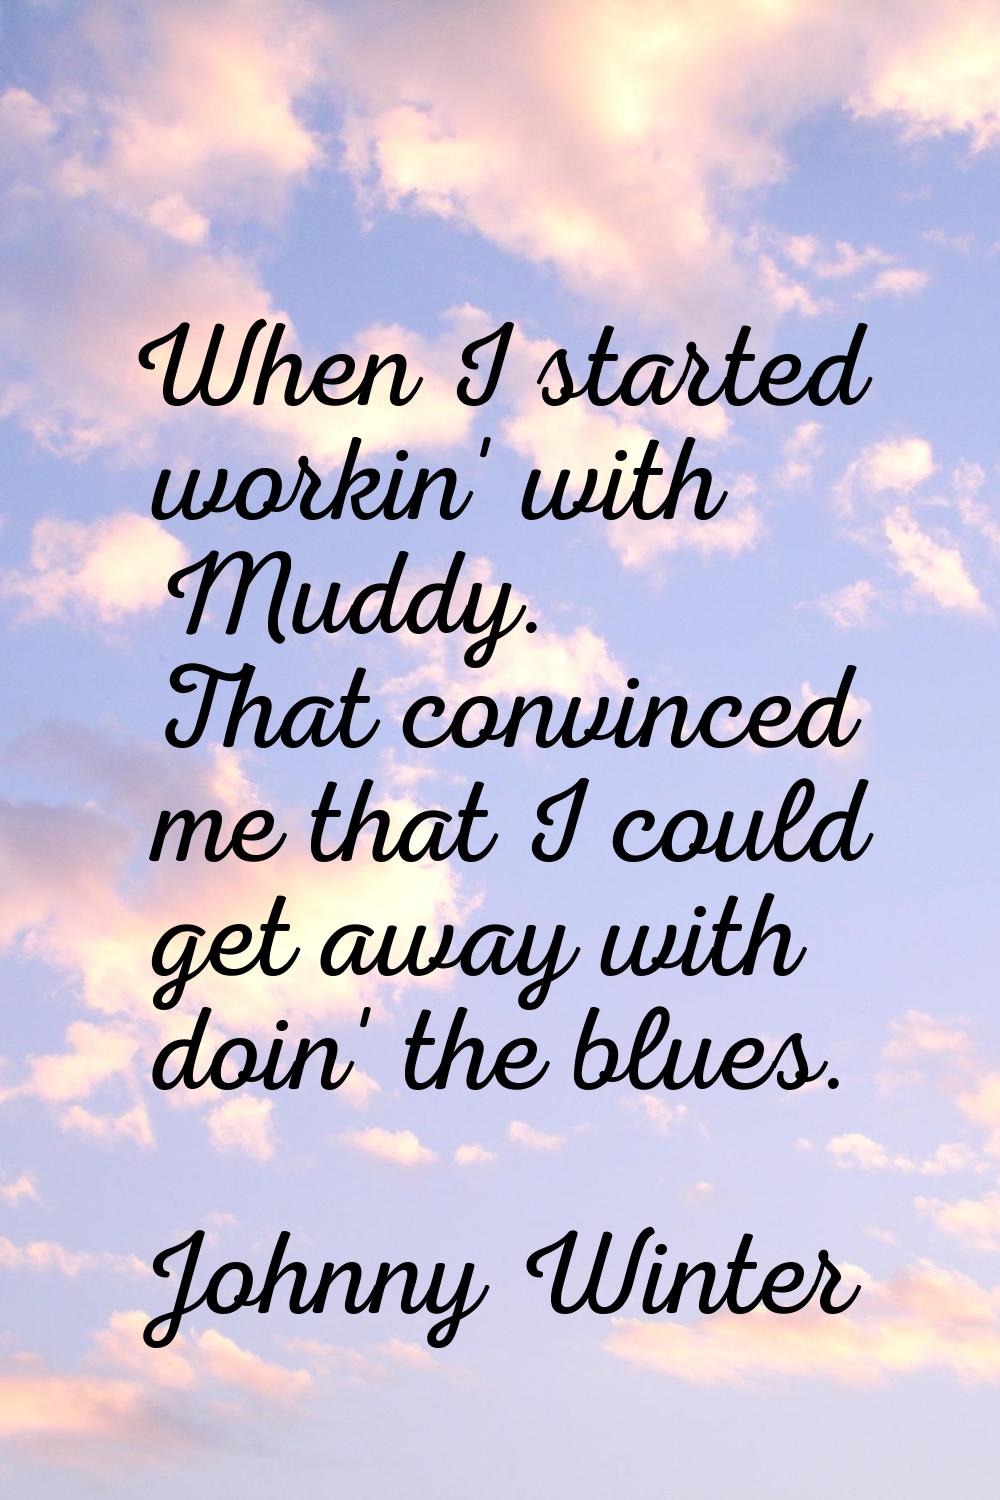 When I started workin' with Muddy. That convinced me that I could get away with doin' the blues.